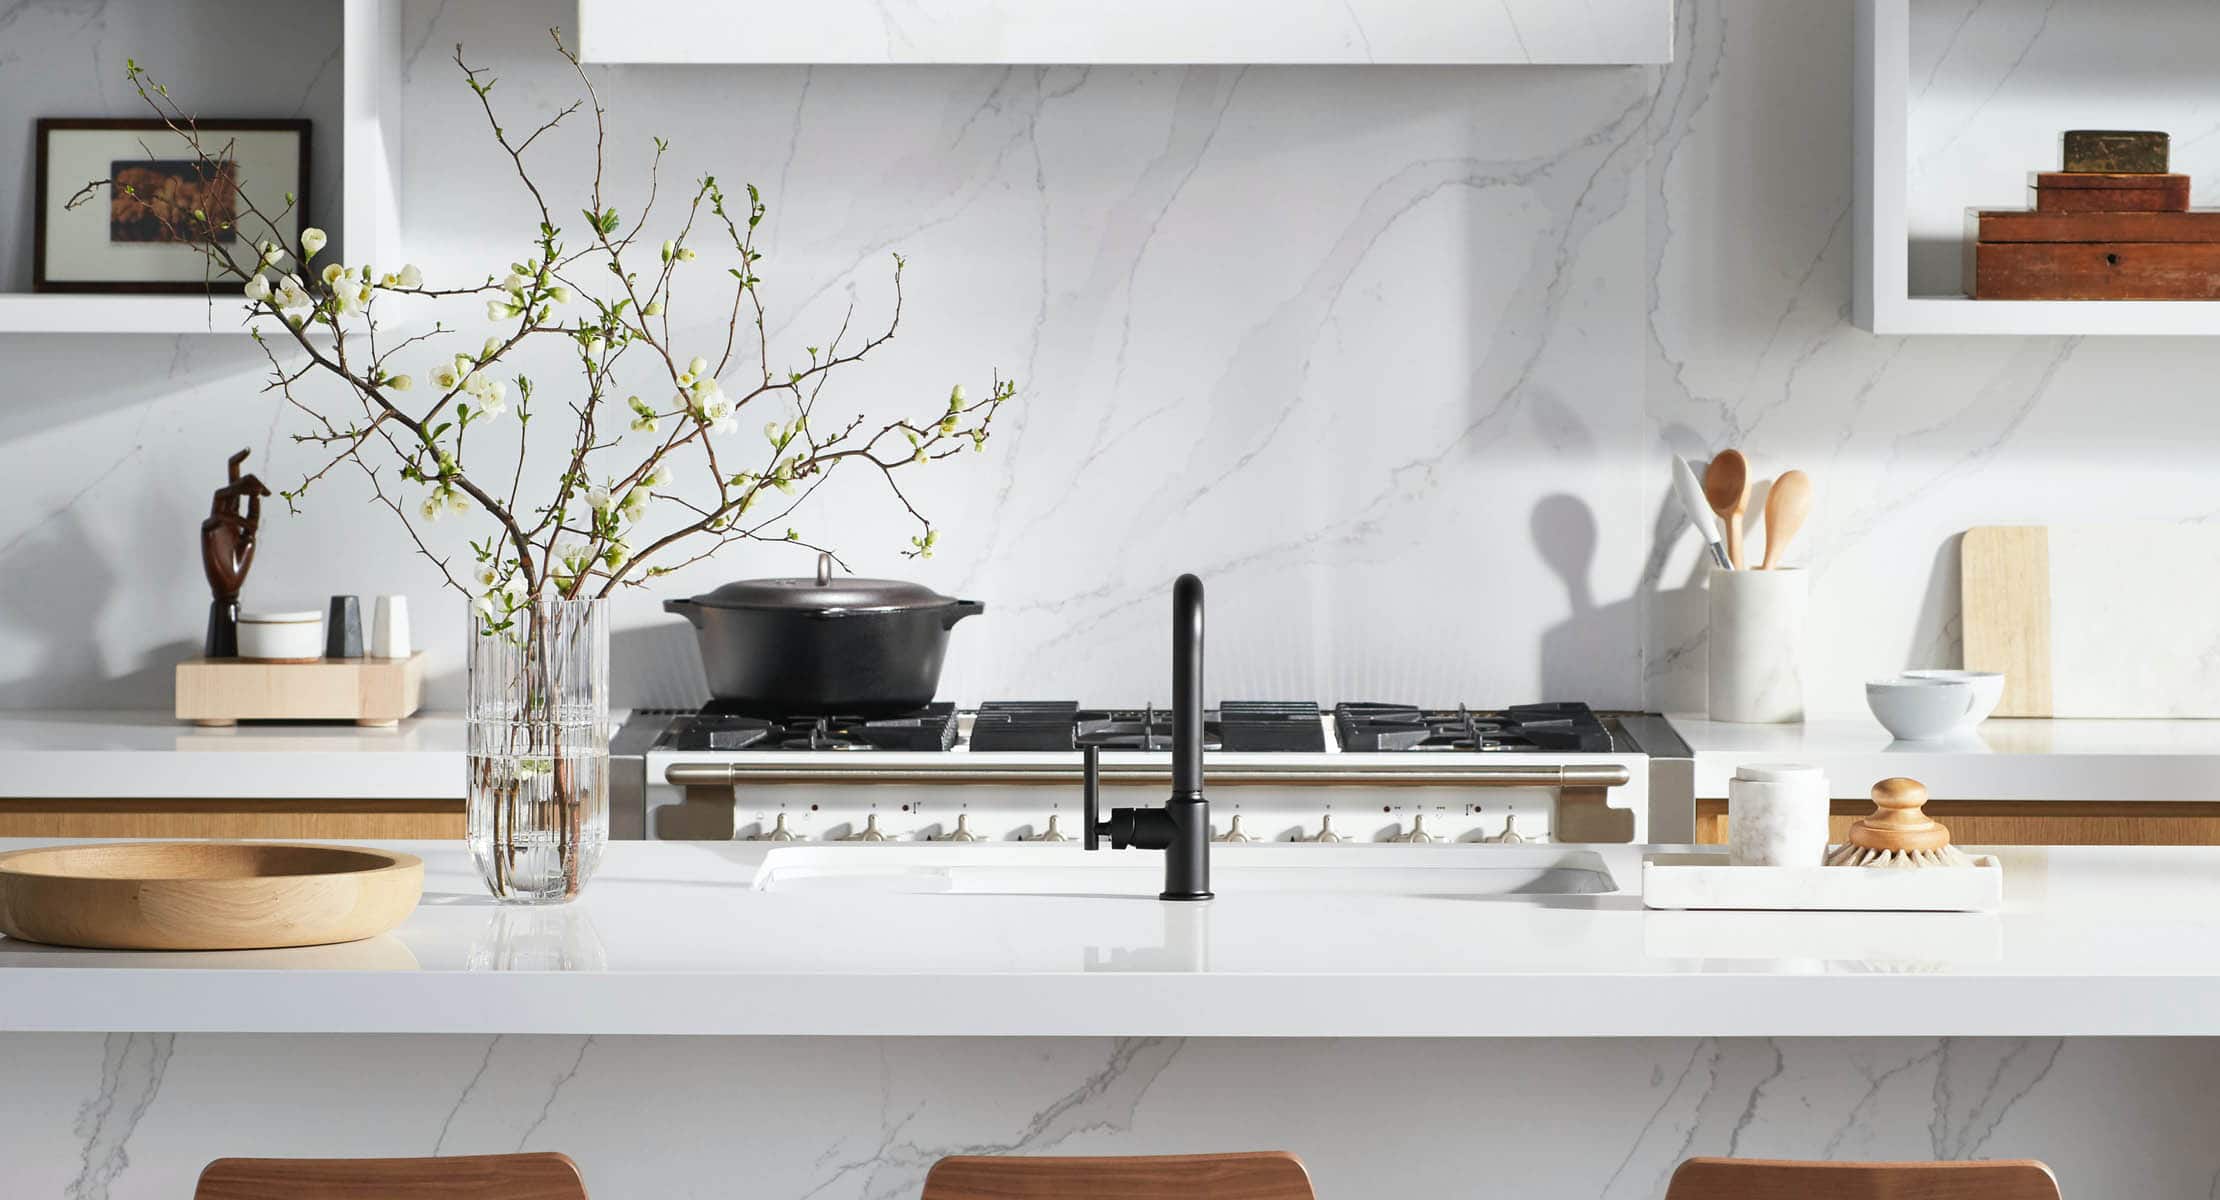 Image of cocinas 03 02 in Walls, countertop, and island in the same material - Cosentino